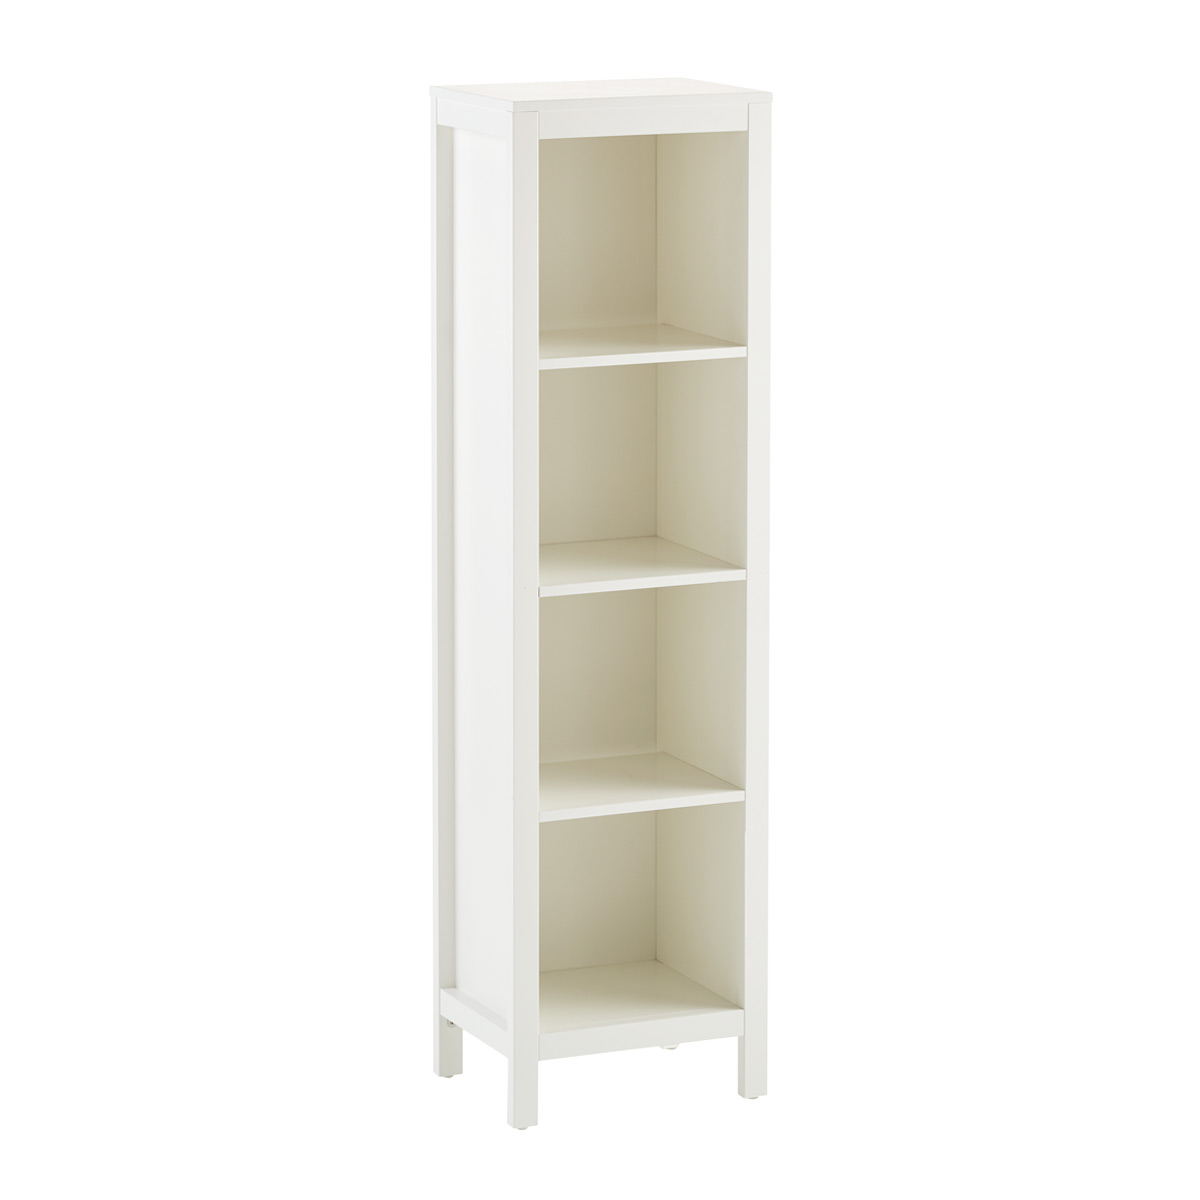 Clybourn 4-Cube Cubby Tall White, 16-1/4" x 12-1/2" x 59" H | The Container Store